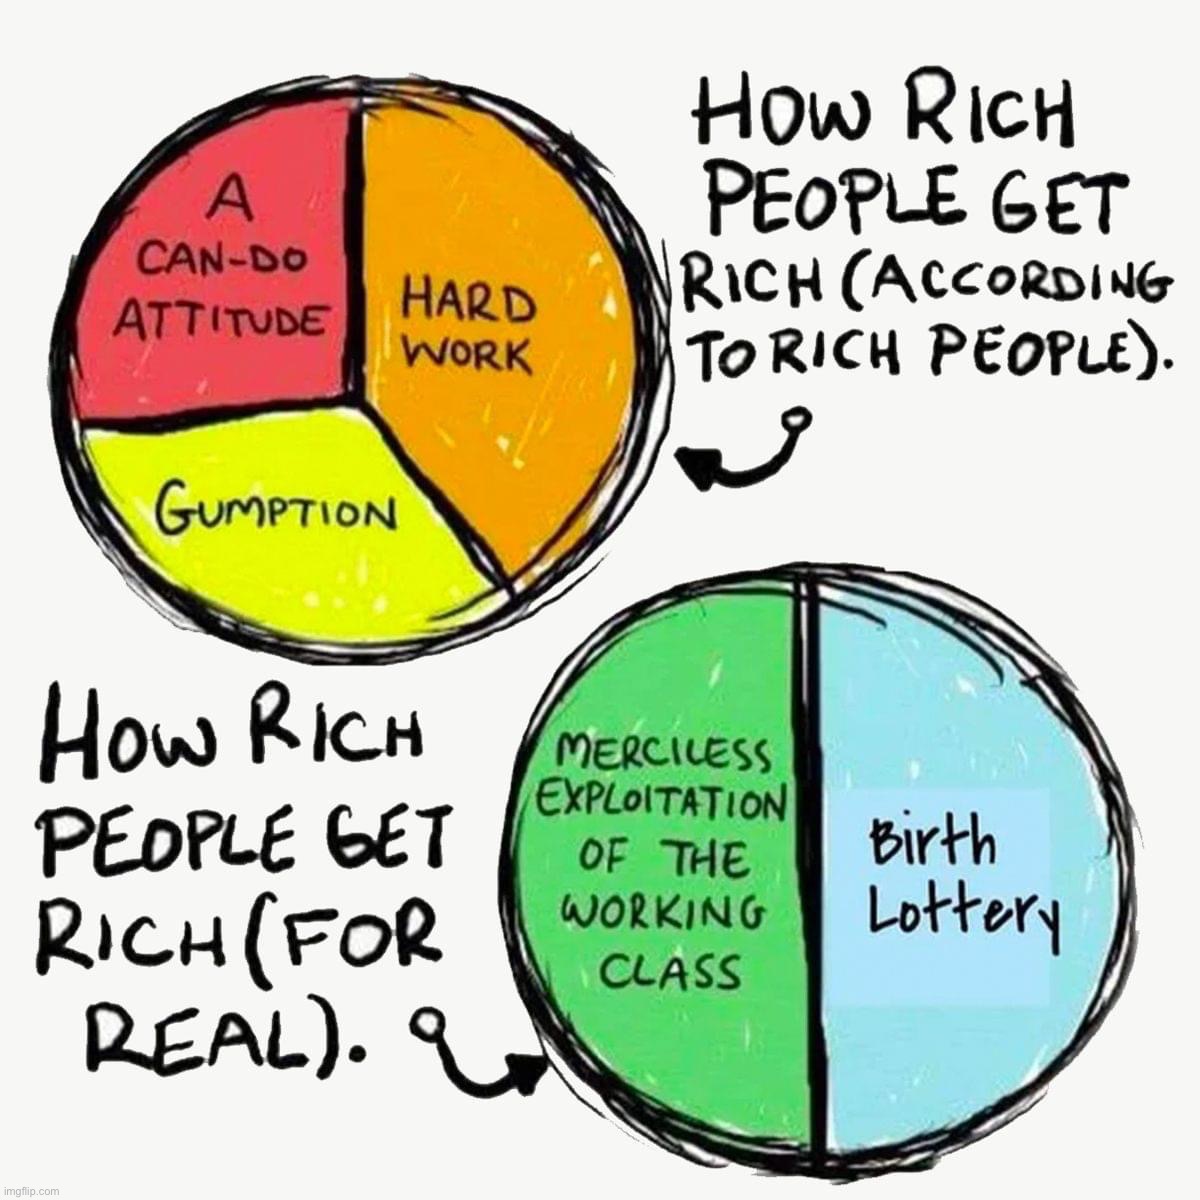 Most people with stupid money got there through luck and/or greed. | image tagged in how people get rich,rich people,rich,wealthy,capitalism,exploitation | made w/ Imgflip meme maker